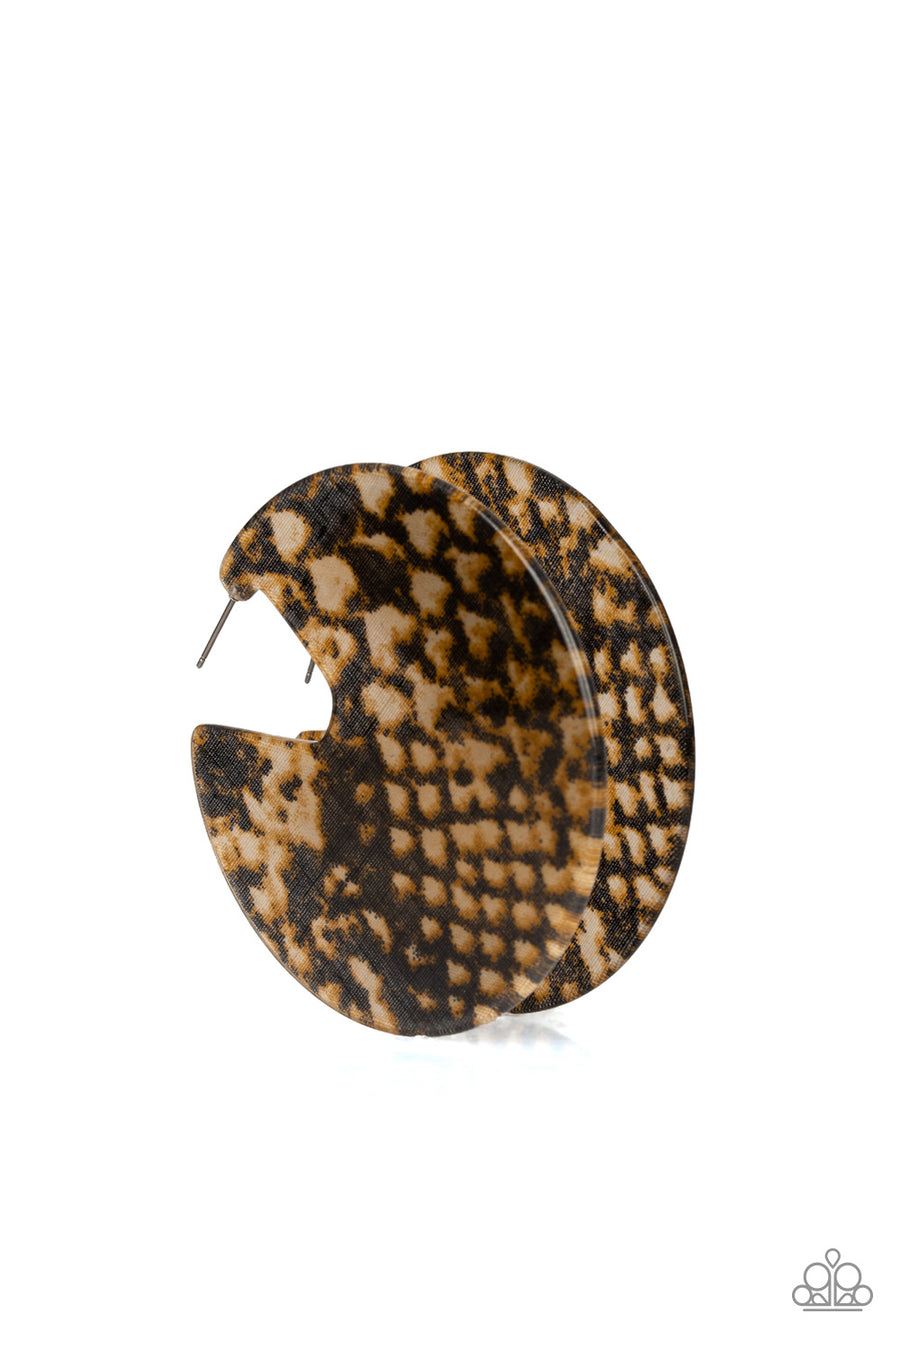 Hit Or Miss - Brown Tortoise Shell Acrylic Earrings - Paparazzi Accessories